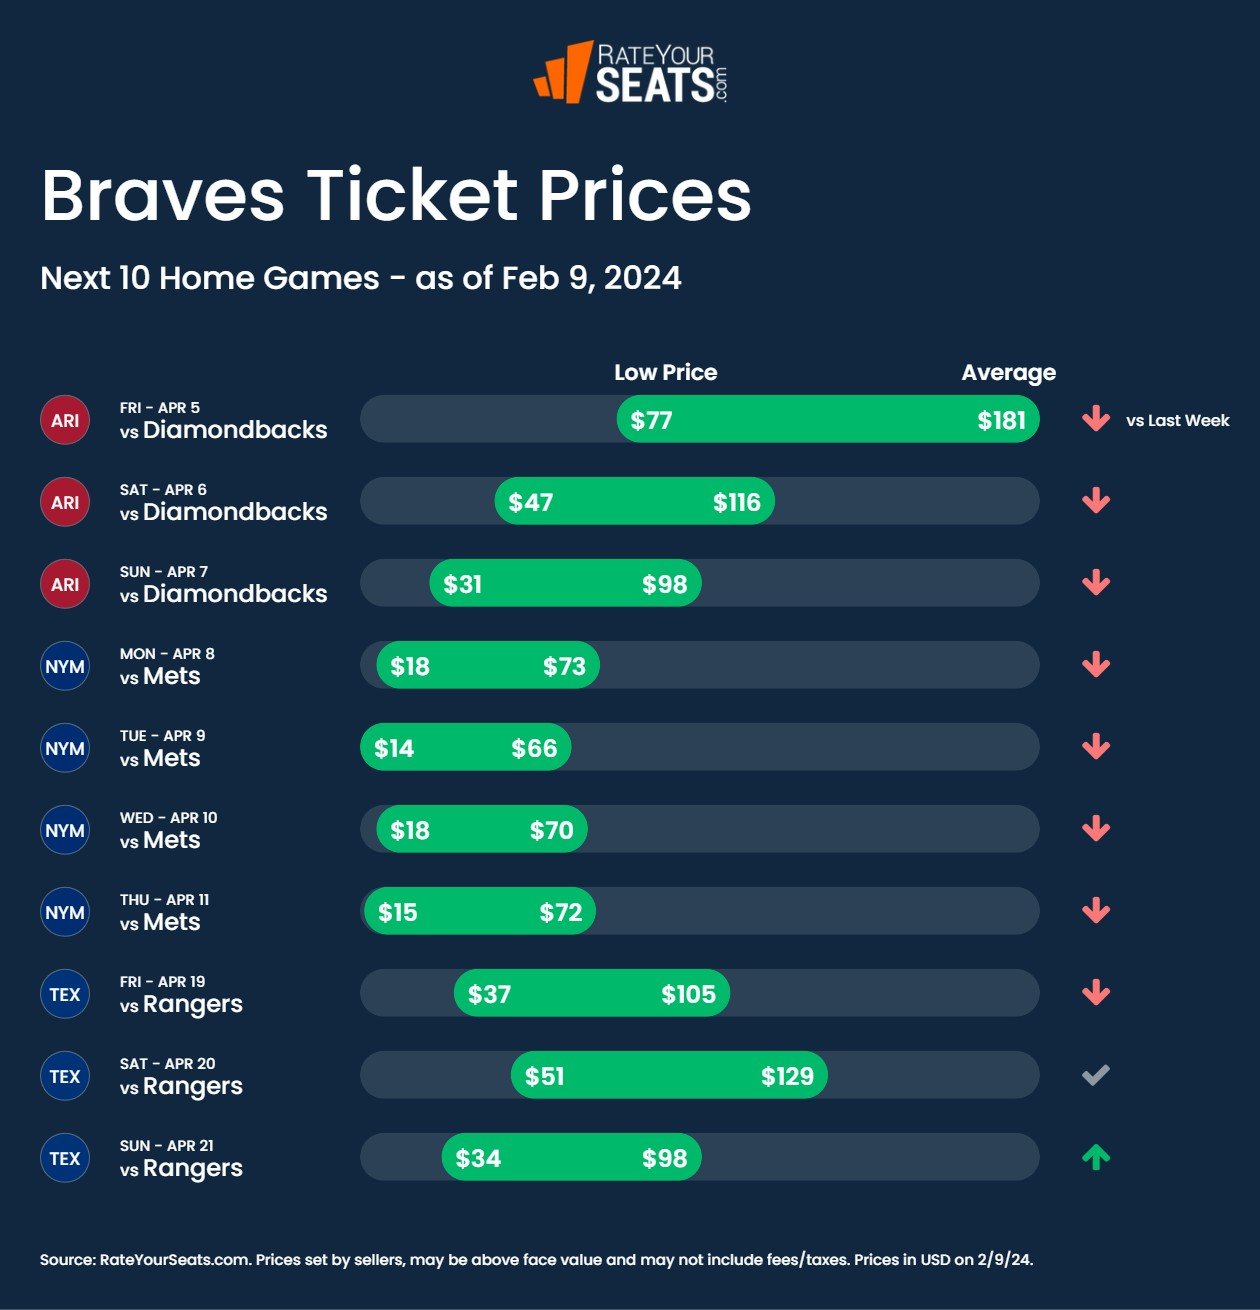 Braves tickets pricing week of February 9 2024